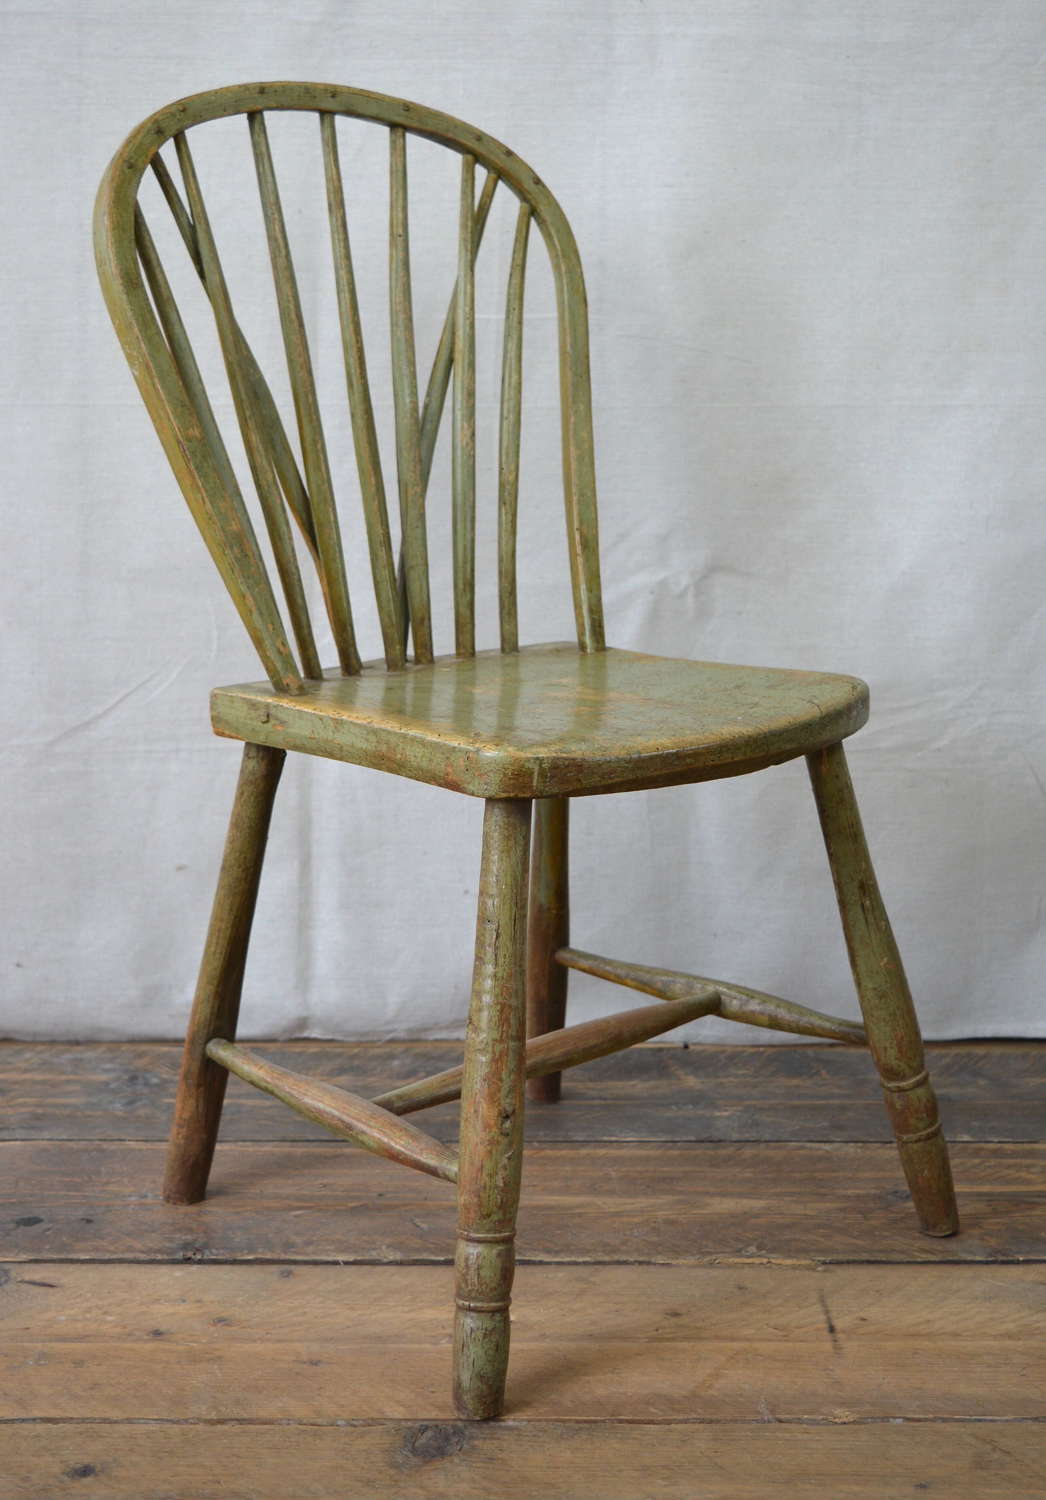 EARLY 18TH CENTURY YEALMPTON CHAIR